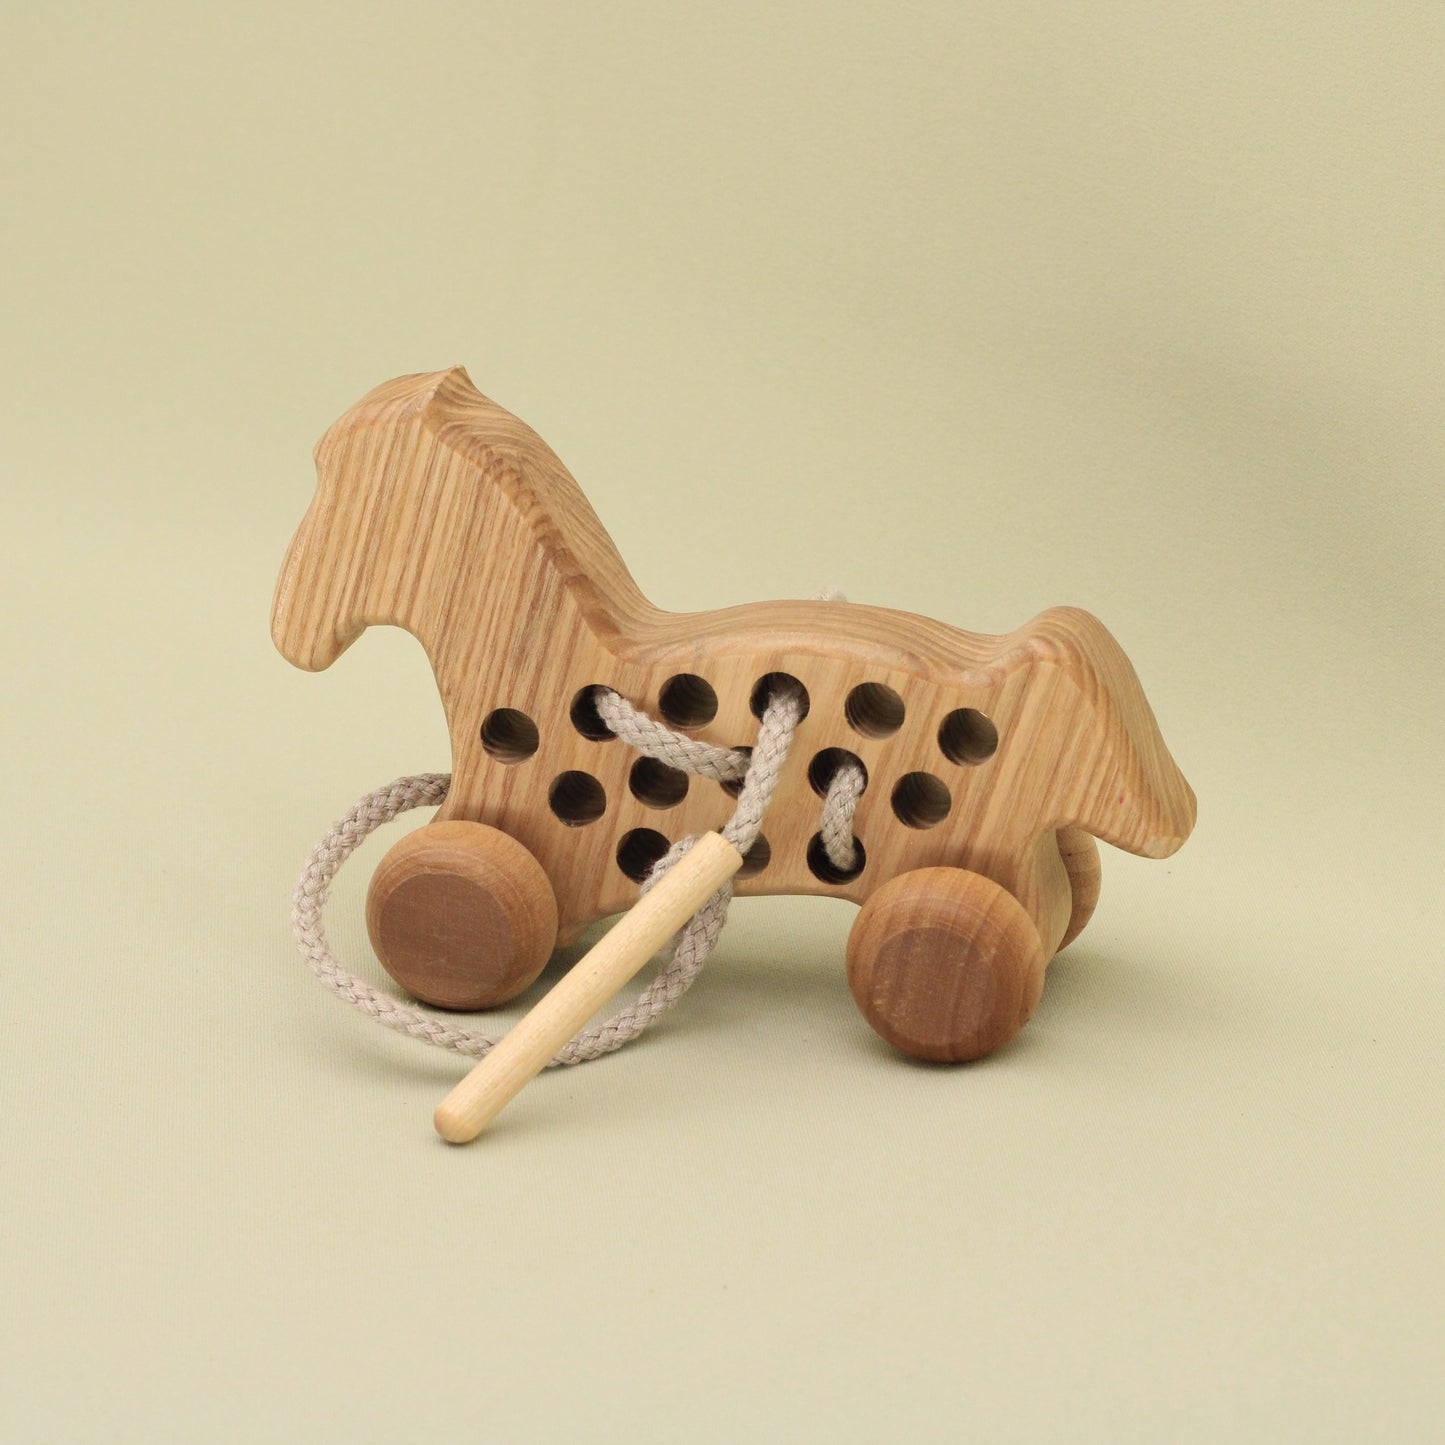 Lotes Toys Natural Wooden Threading Lacing Horse TT44